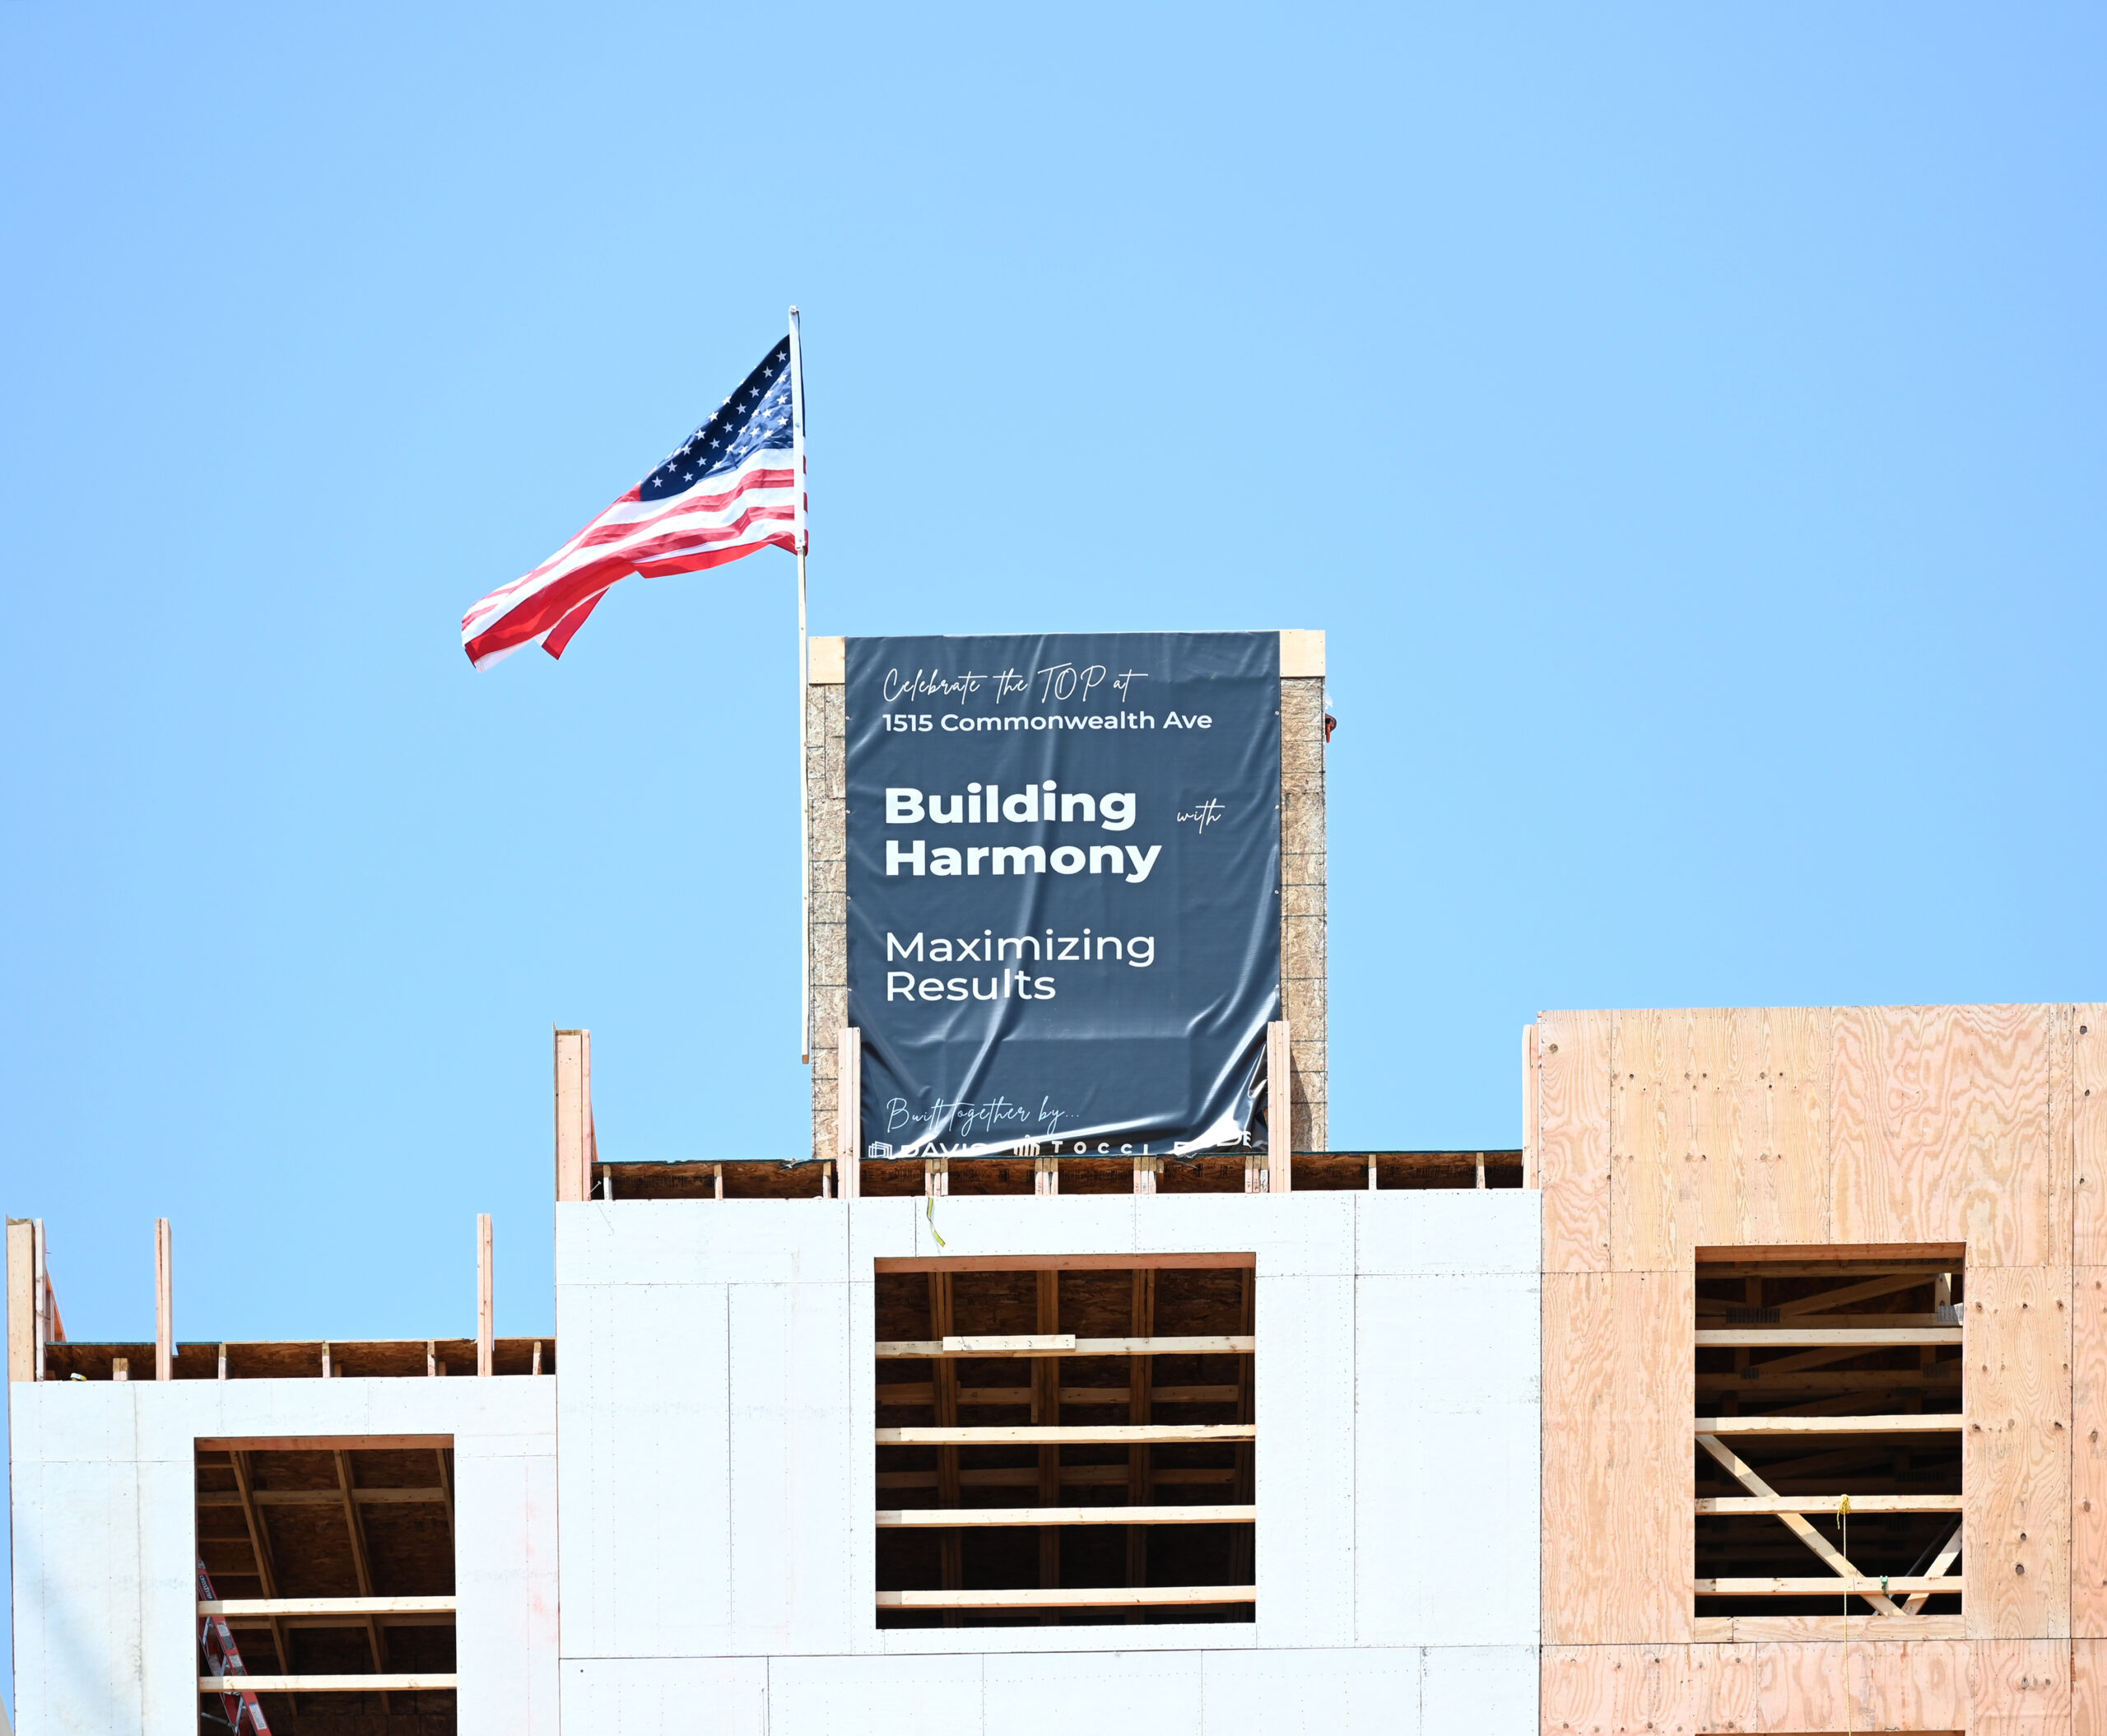 1515 banner lowered onto building during topping off ceremony